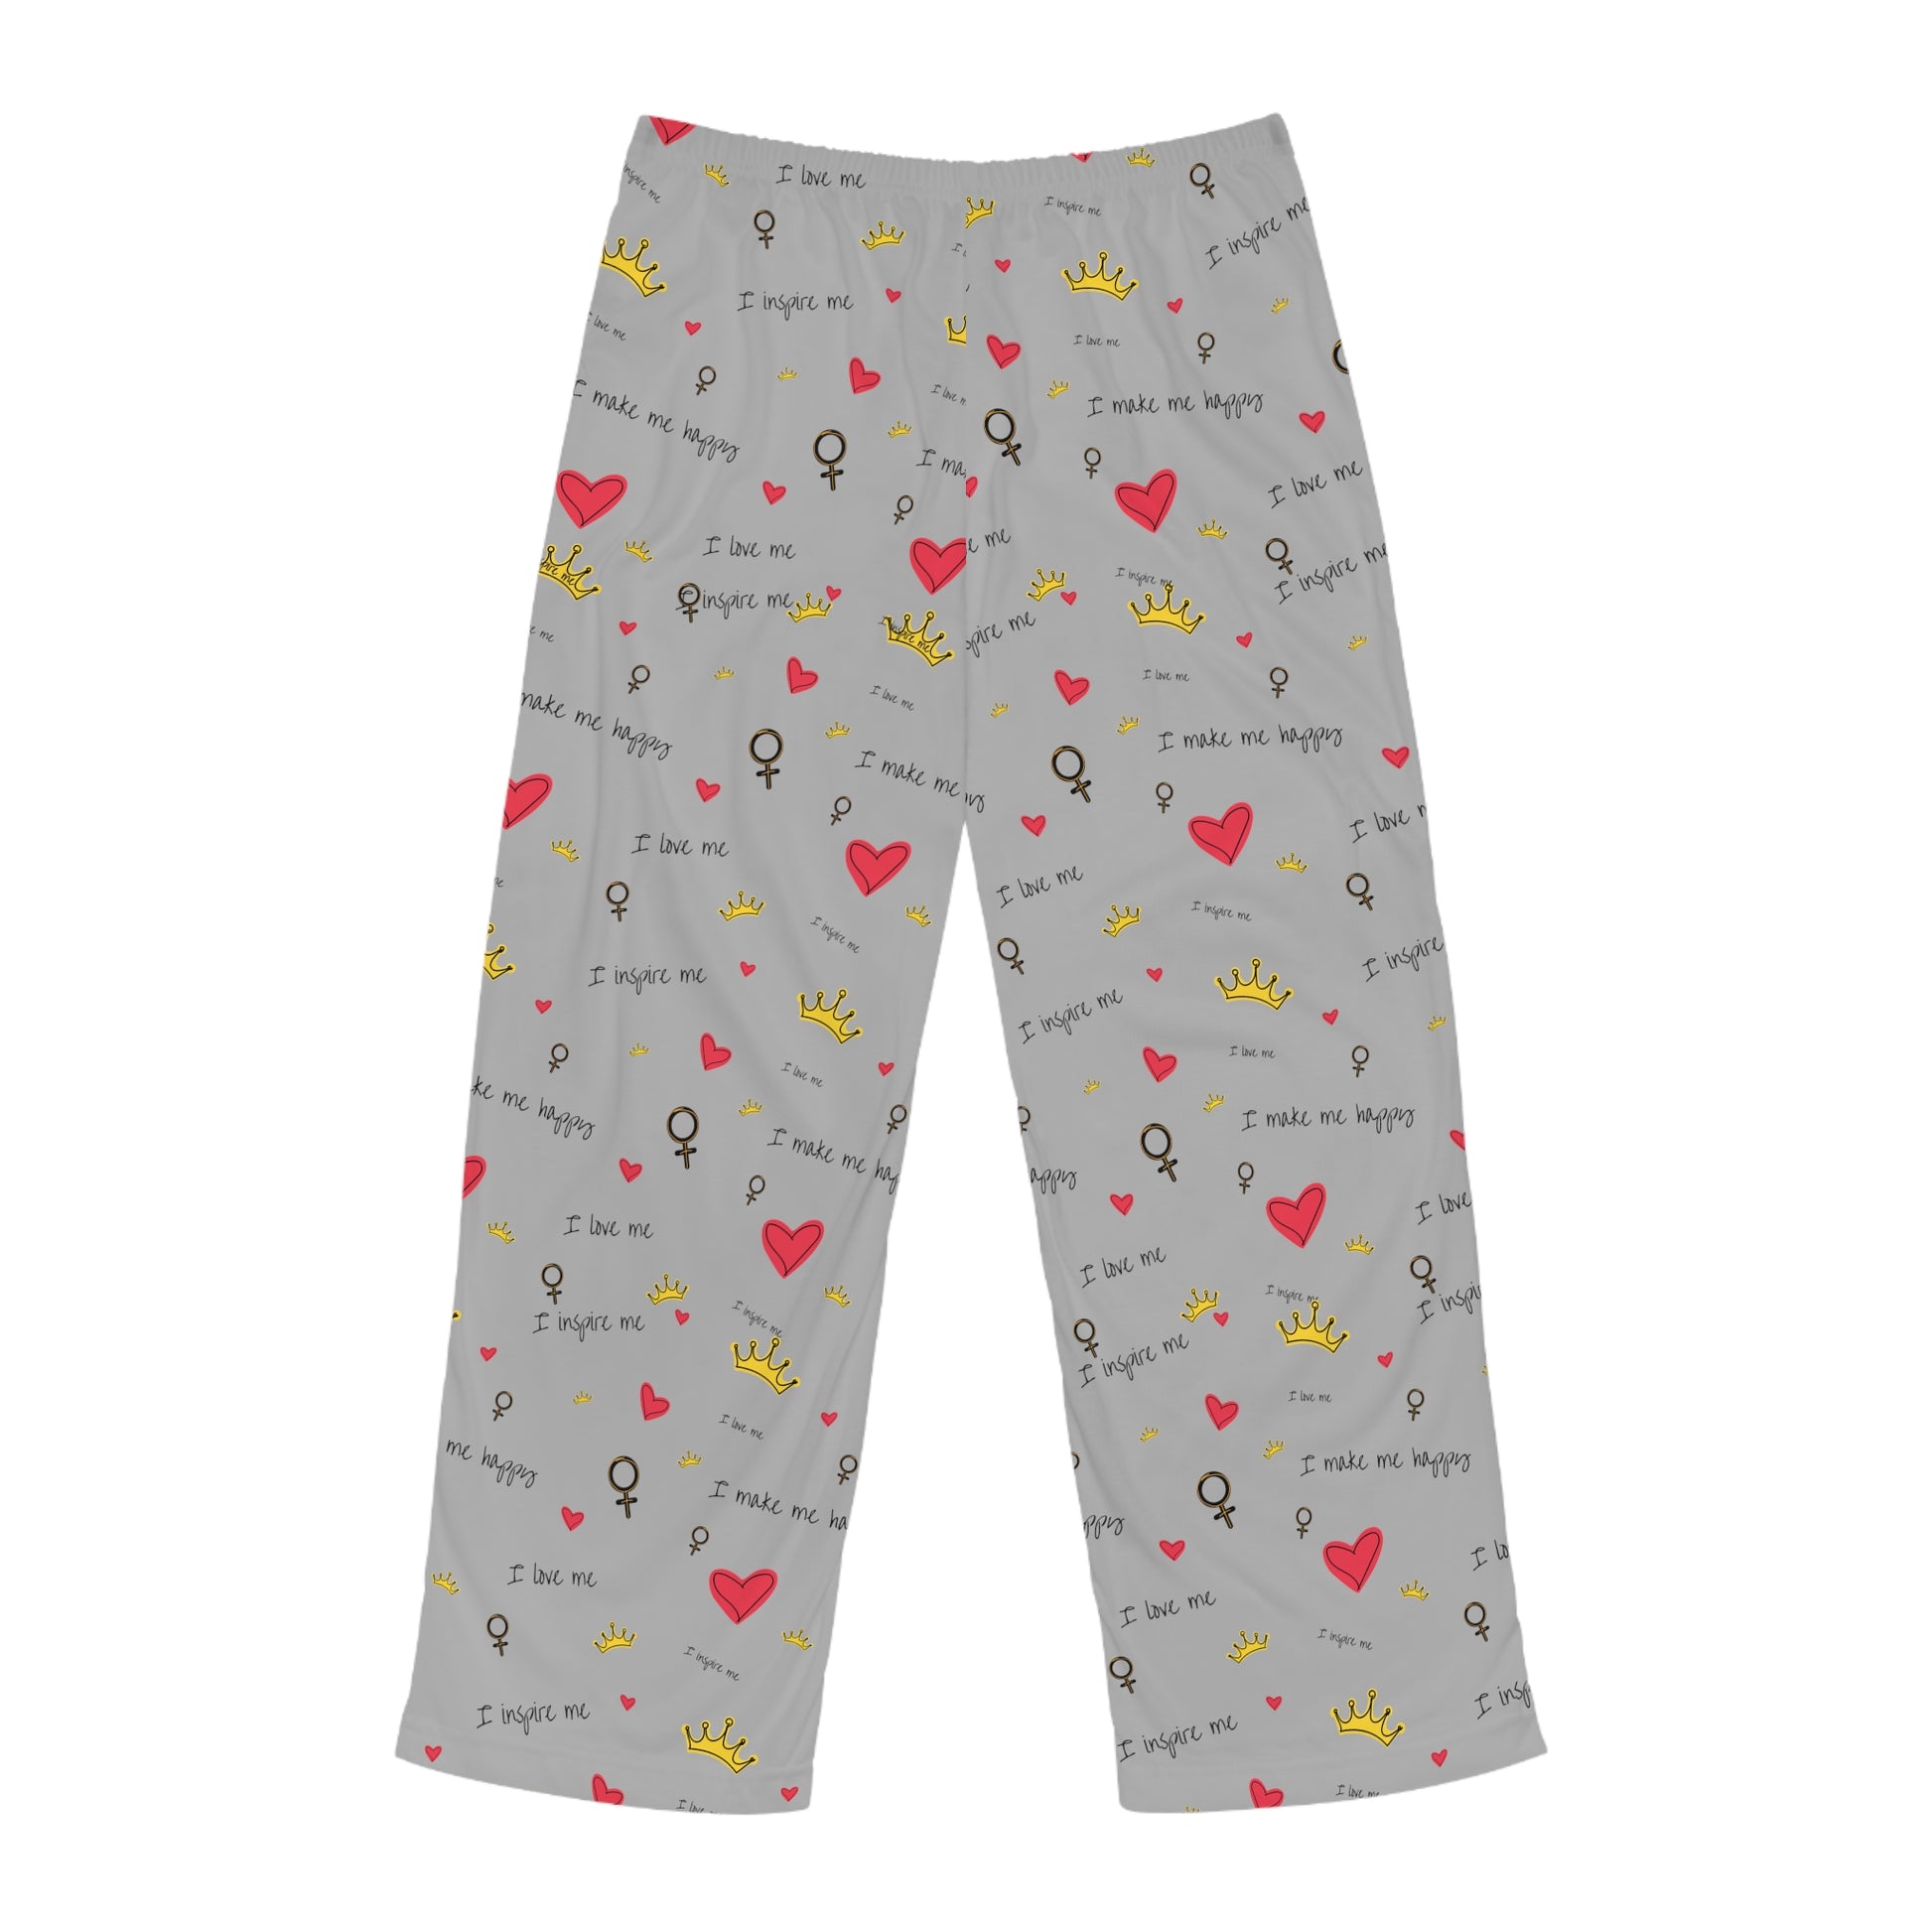 A Printify Men's Pajama Pants: Polyester jersey; Relaxed fit; Elastic; Drawstring with hearts, perfect for a Valentine's Day gift or as Men's Pajama Pants.